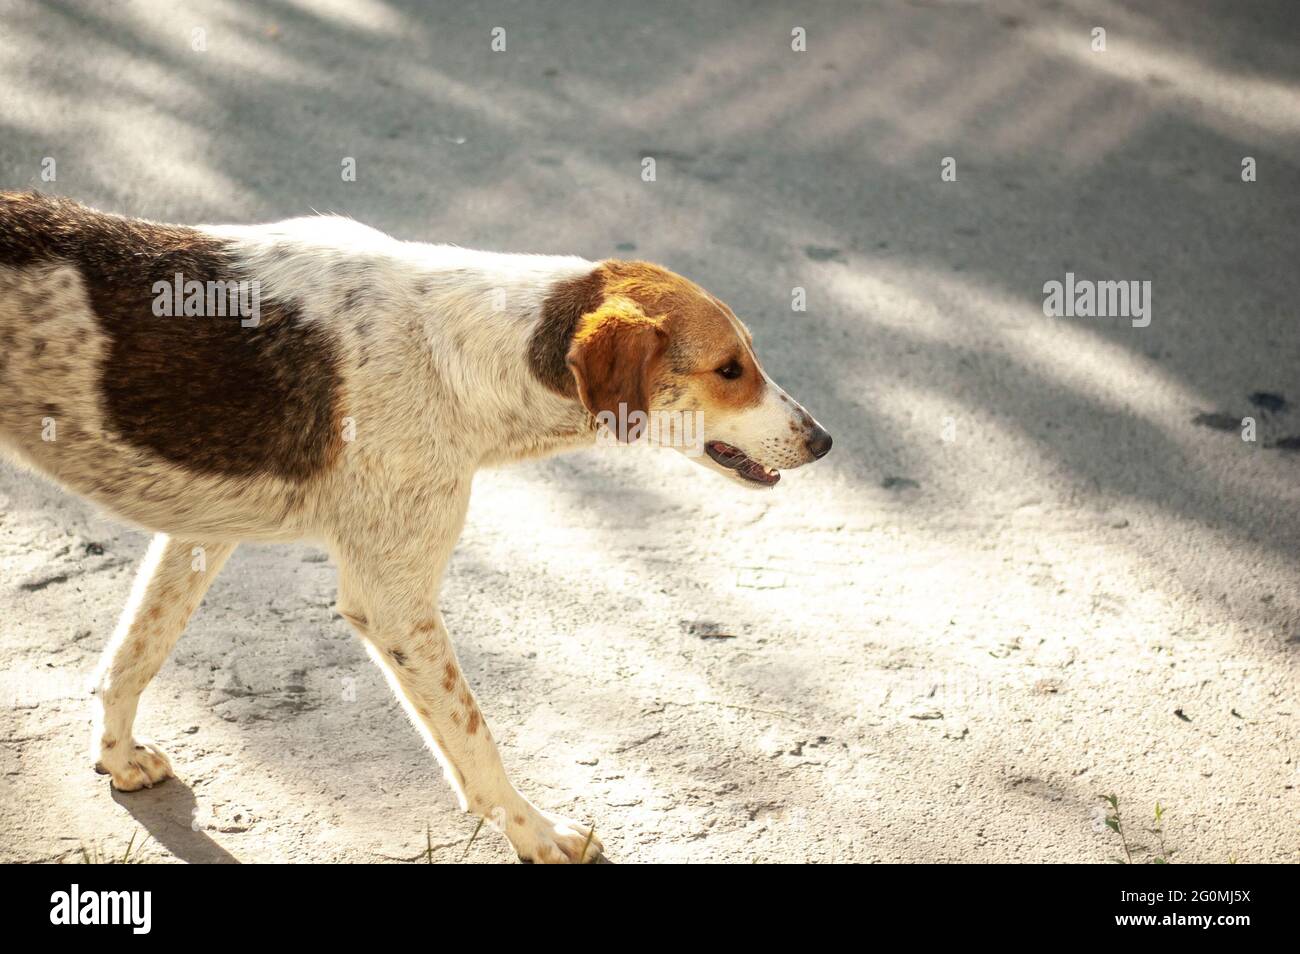 A white homeless dog with ginges spots walking in the street Stock Photo